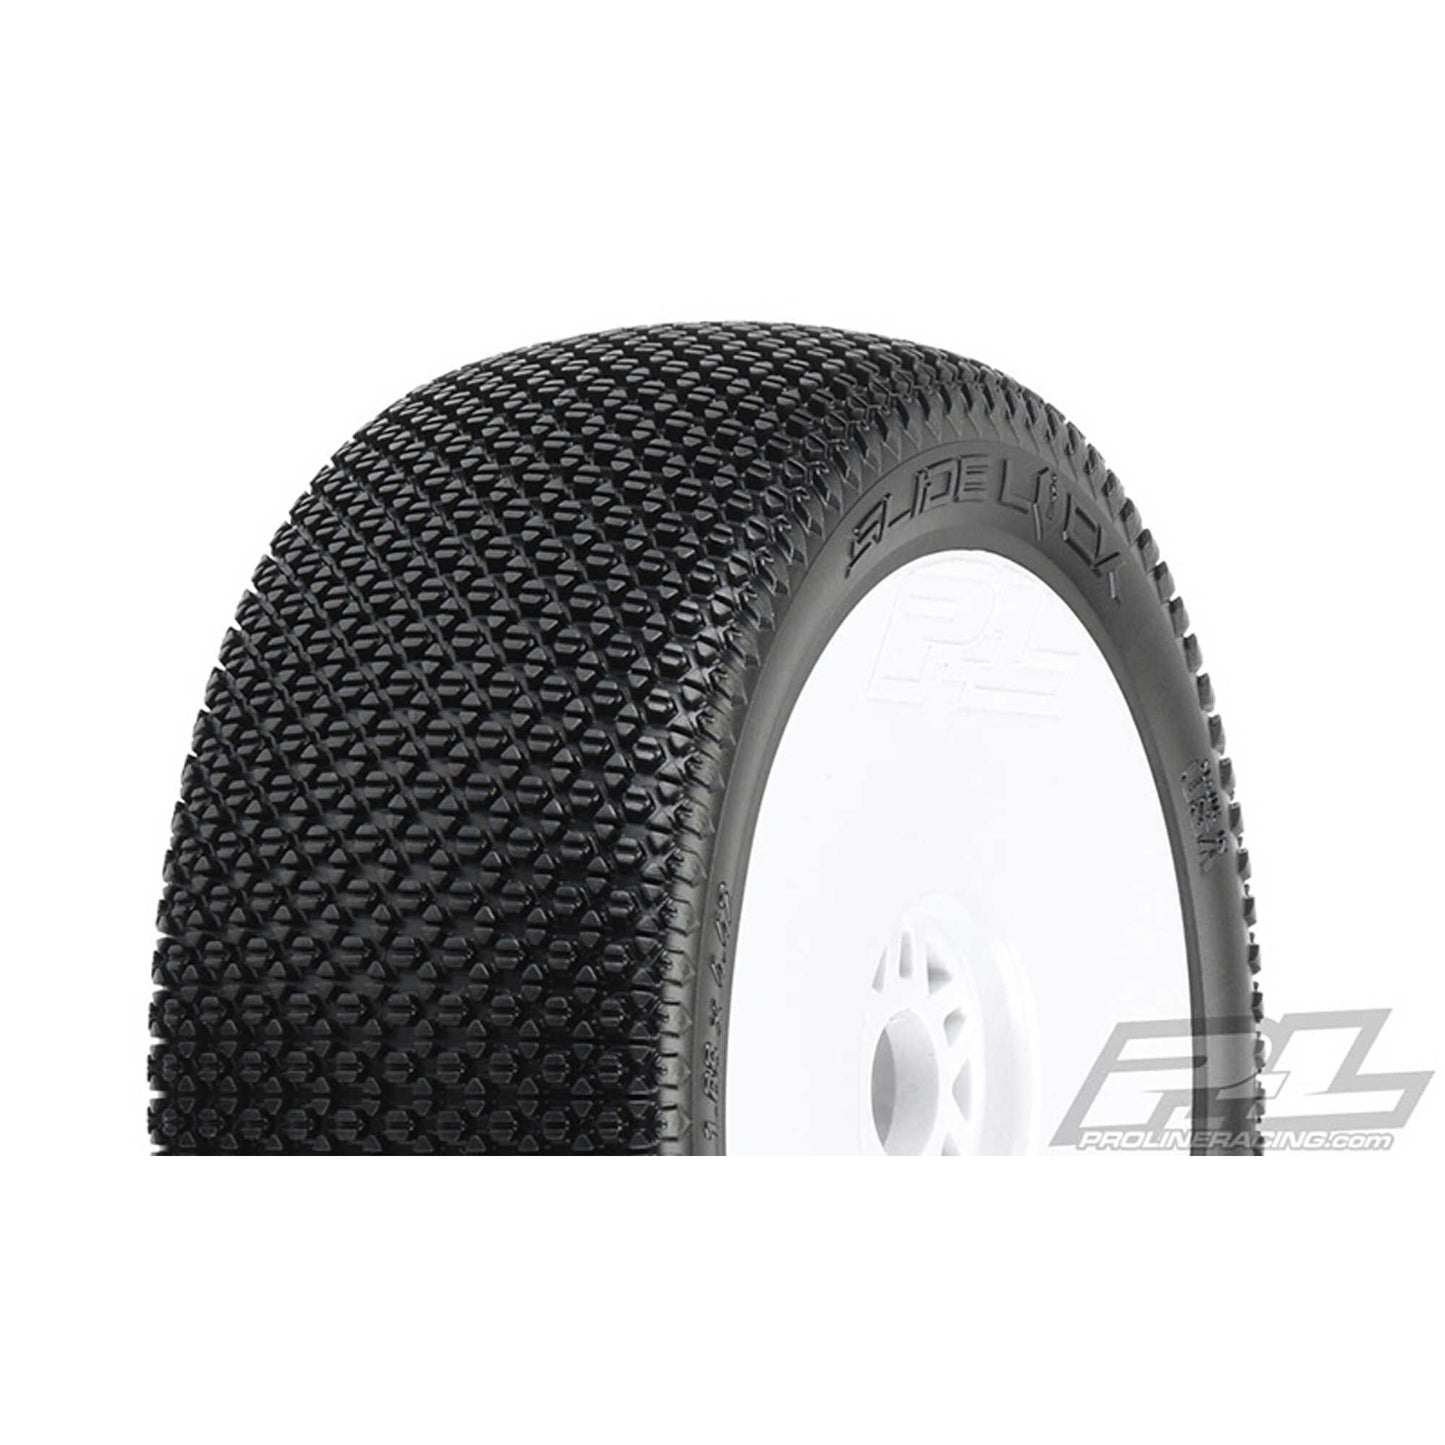 1/8 Slide Lock M3 Front/Rear Buggy Tires Mounted 17mm White (2)